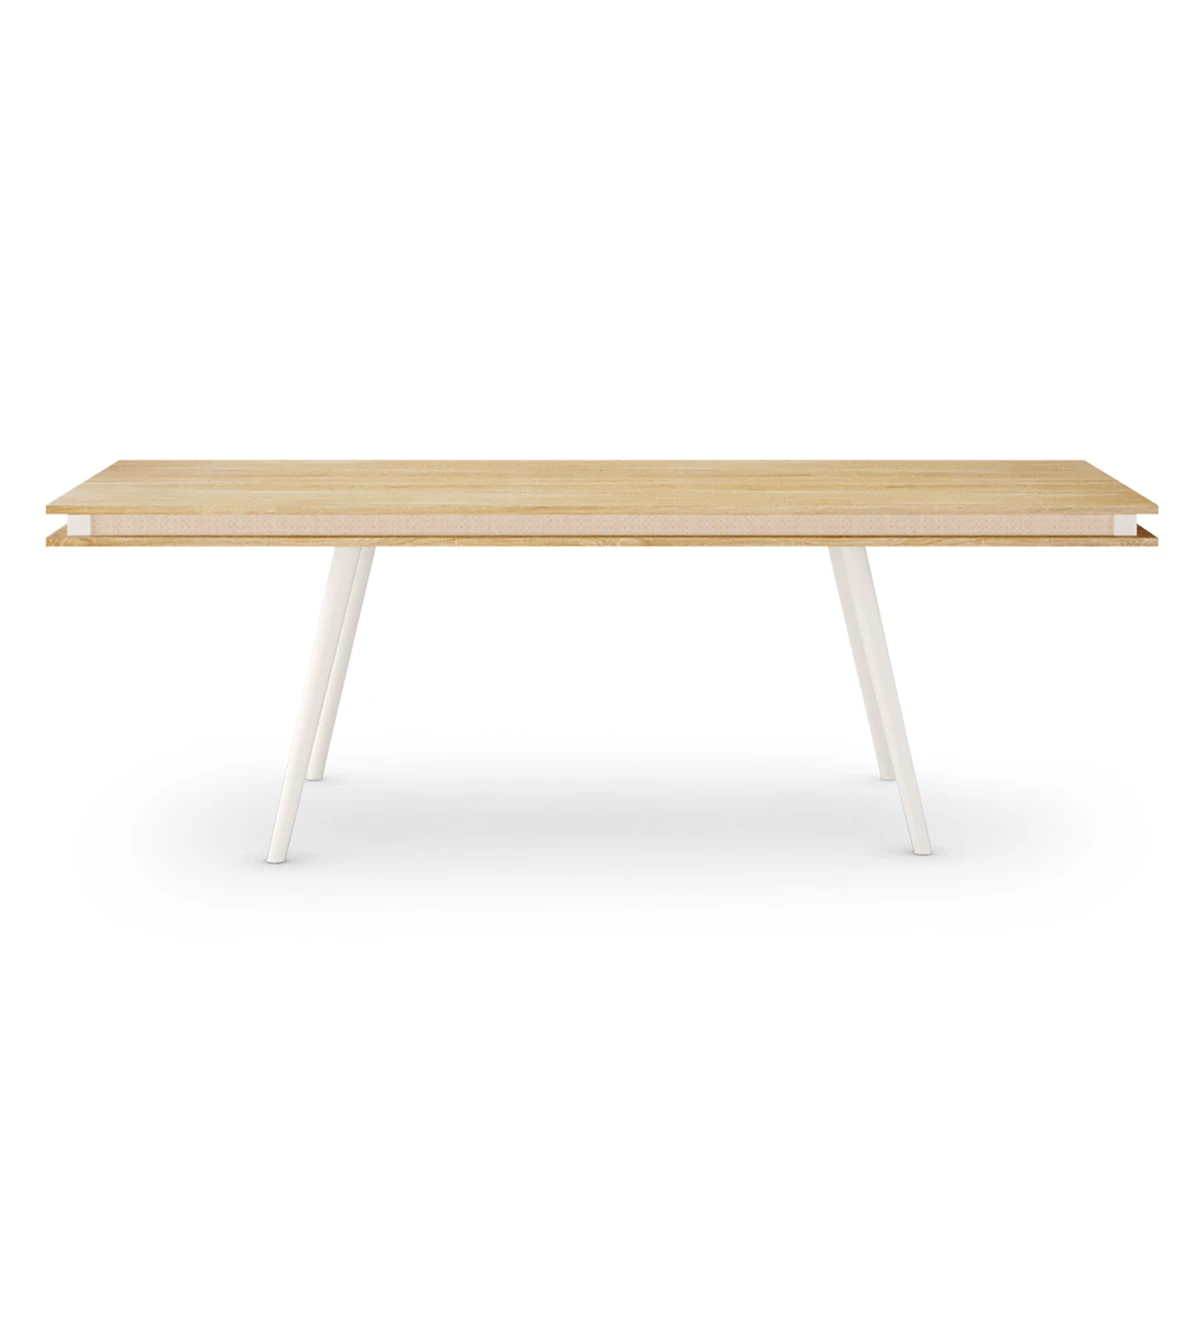 Malmo rectangular dining table 240 x 100 cm, natural oak top, pearl lacquered feet.